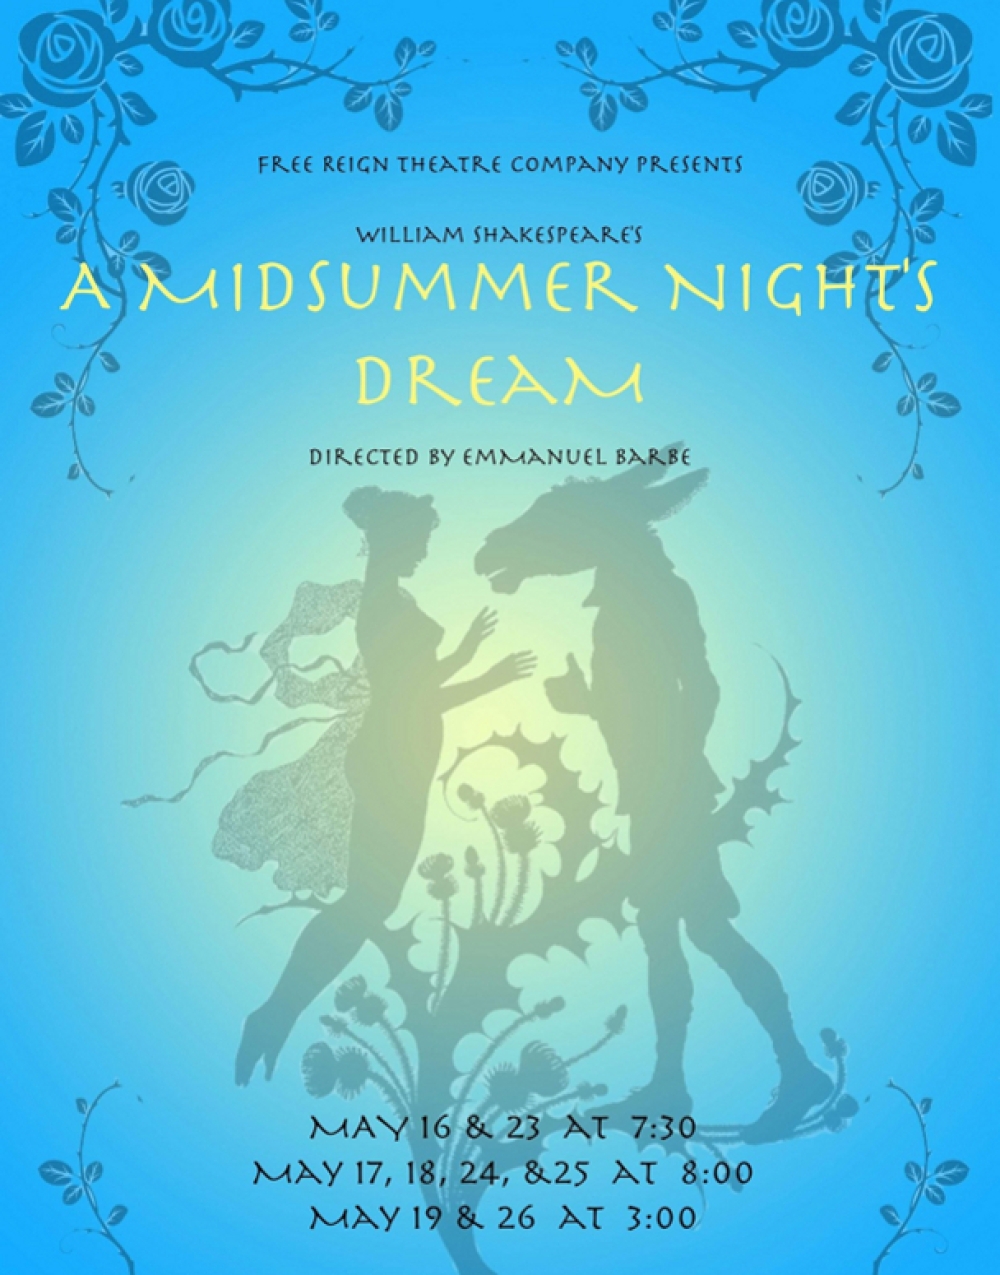 A Midsummer Night's Dream at Free Reign Theatre Company